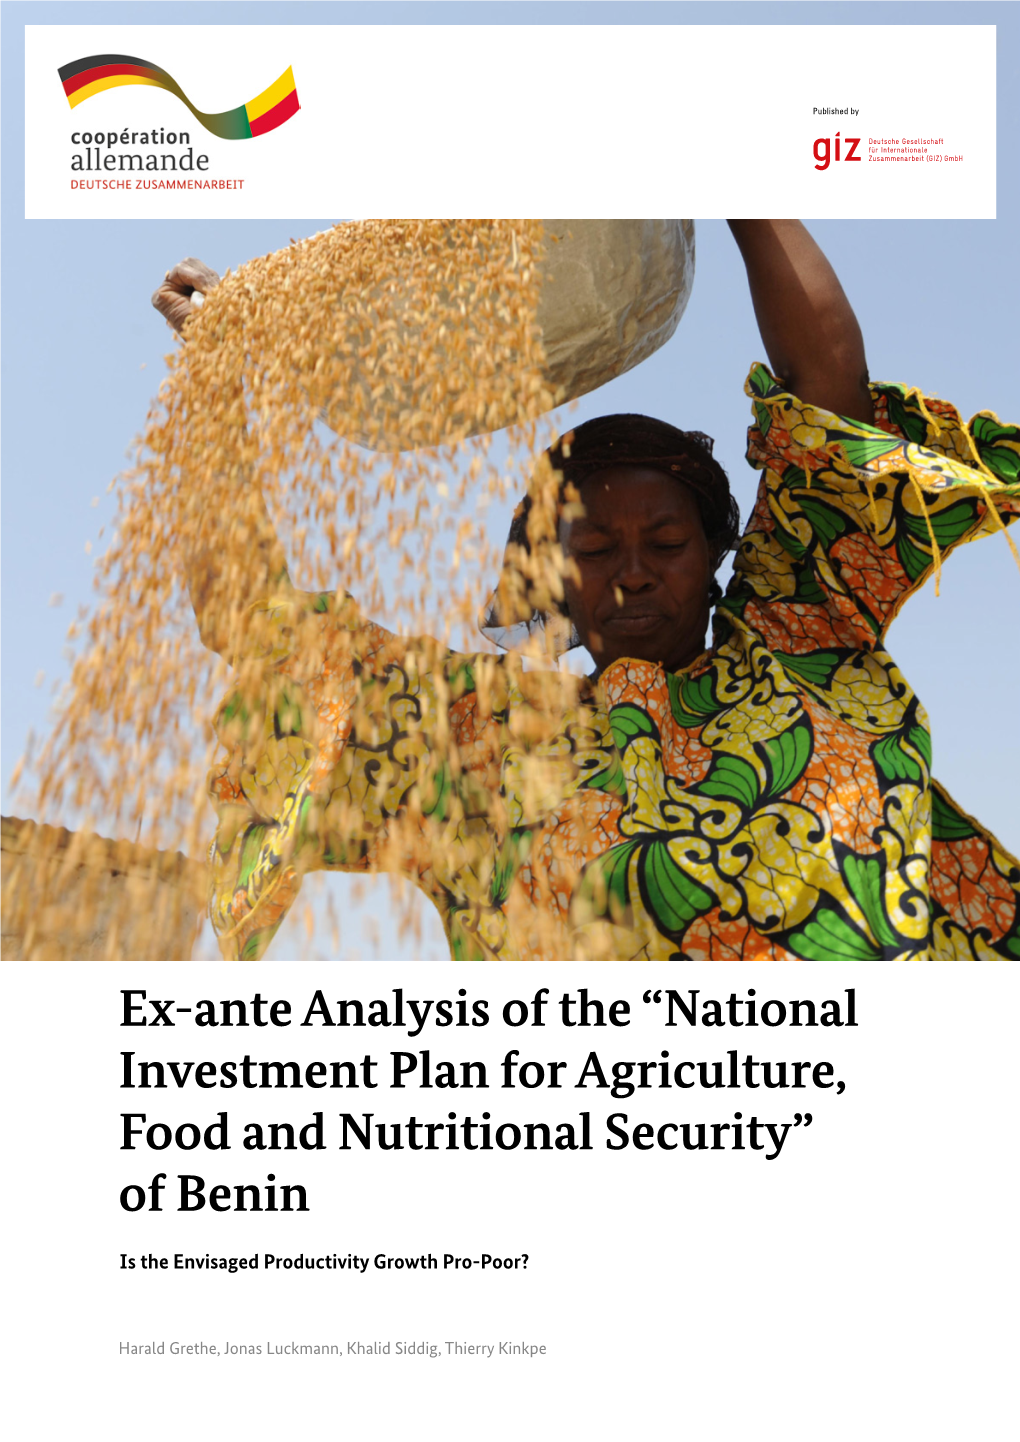 Ex-Ante Analysis of the “National Investment Plan for Agriculture, Food and Nutritional Security” of Benin